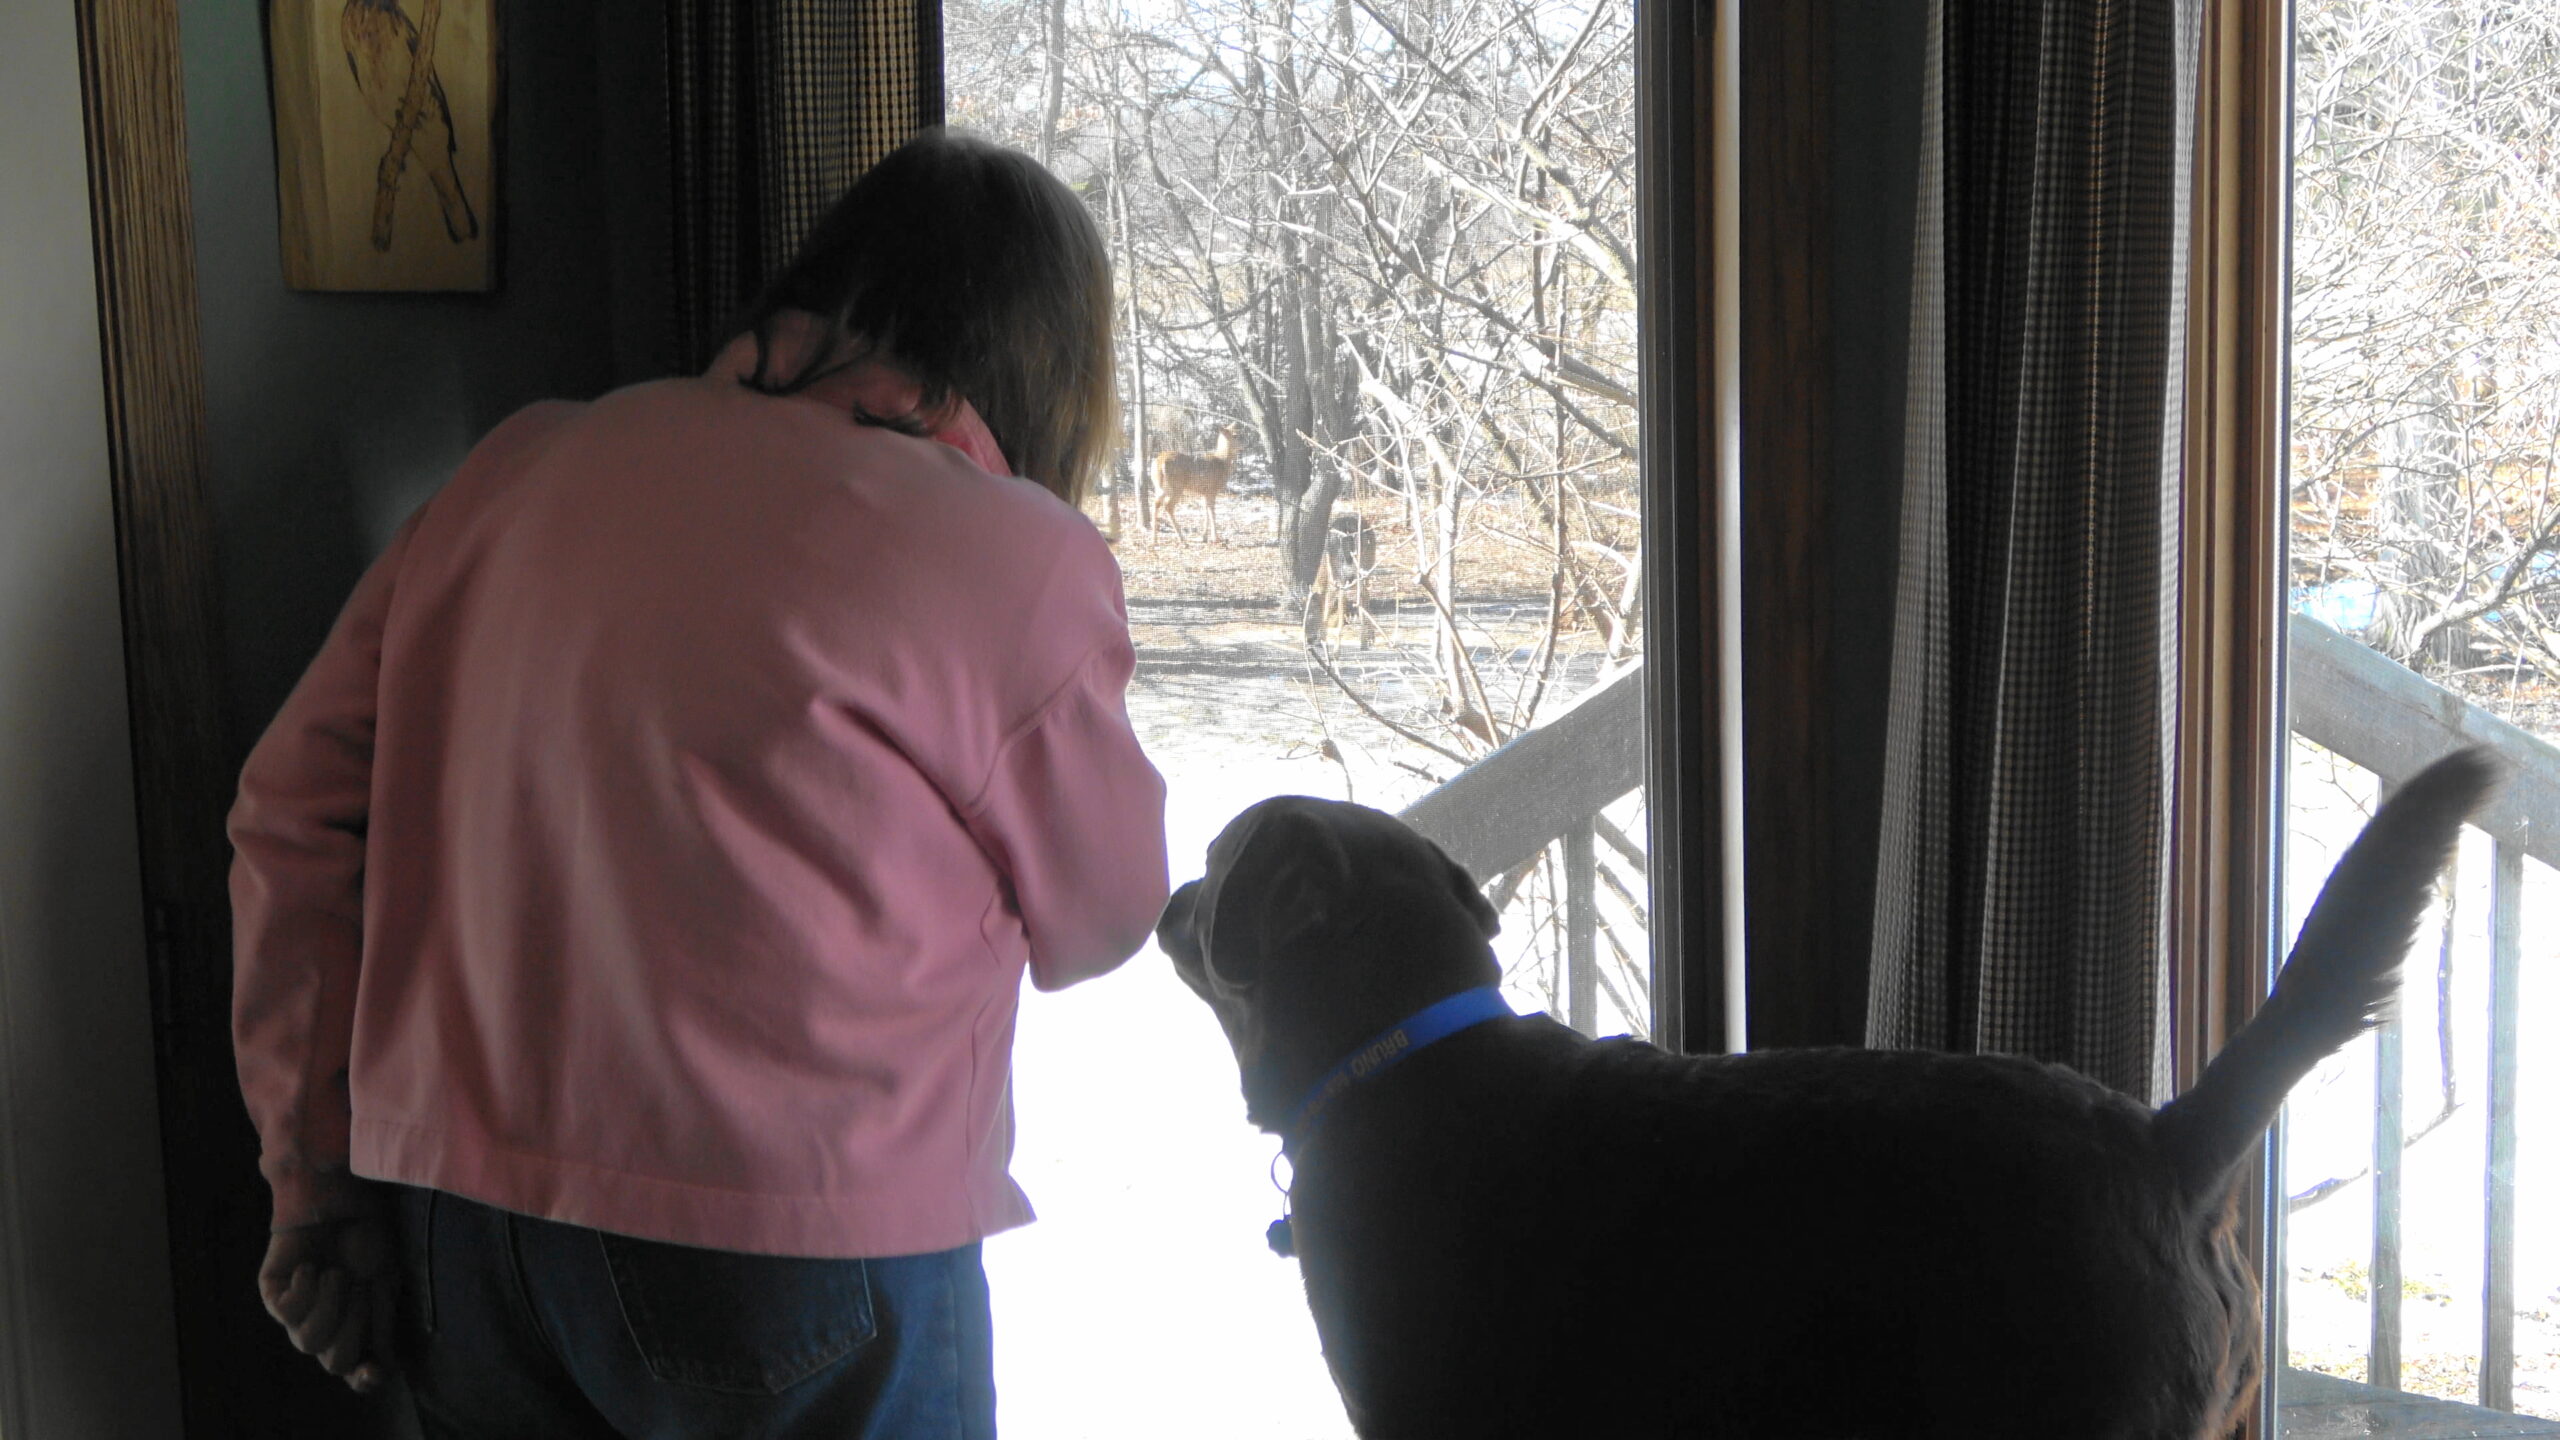 Woman and dog looking out the window at deer in the distance